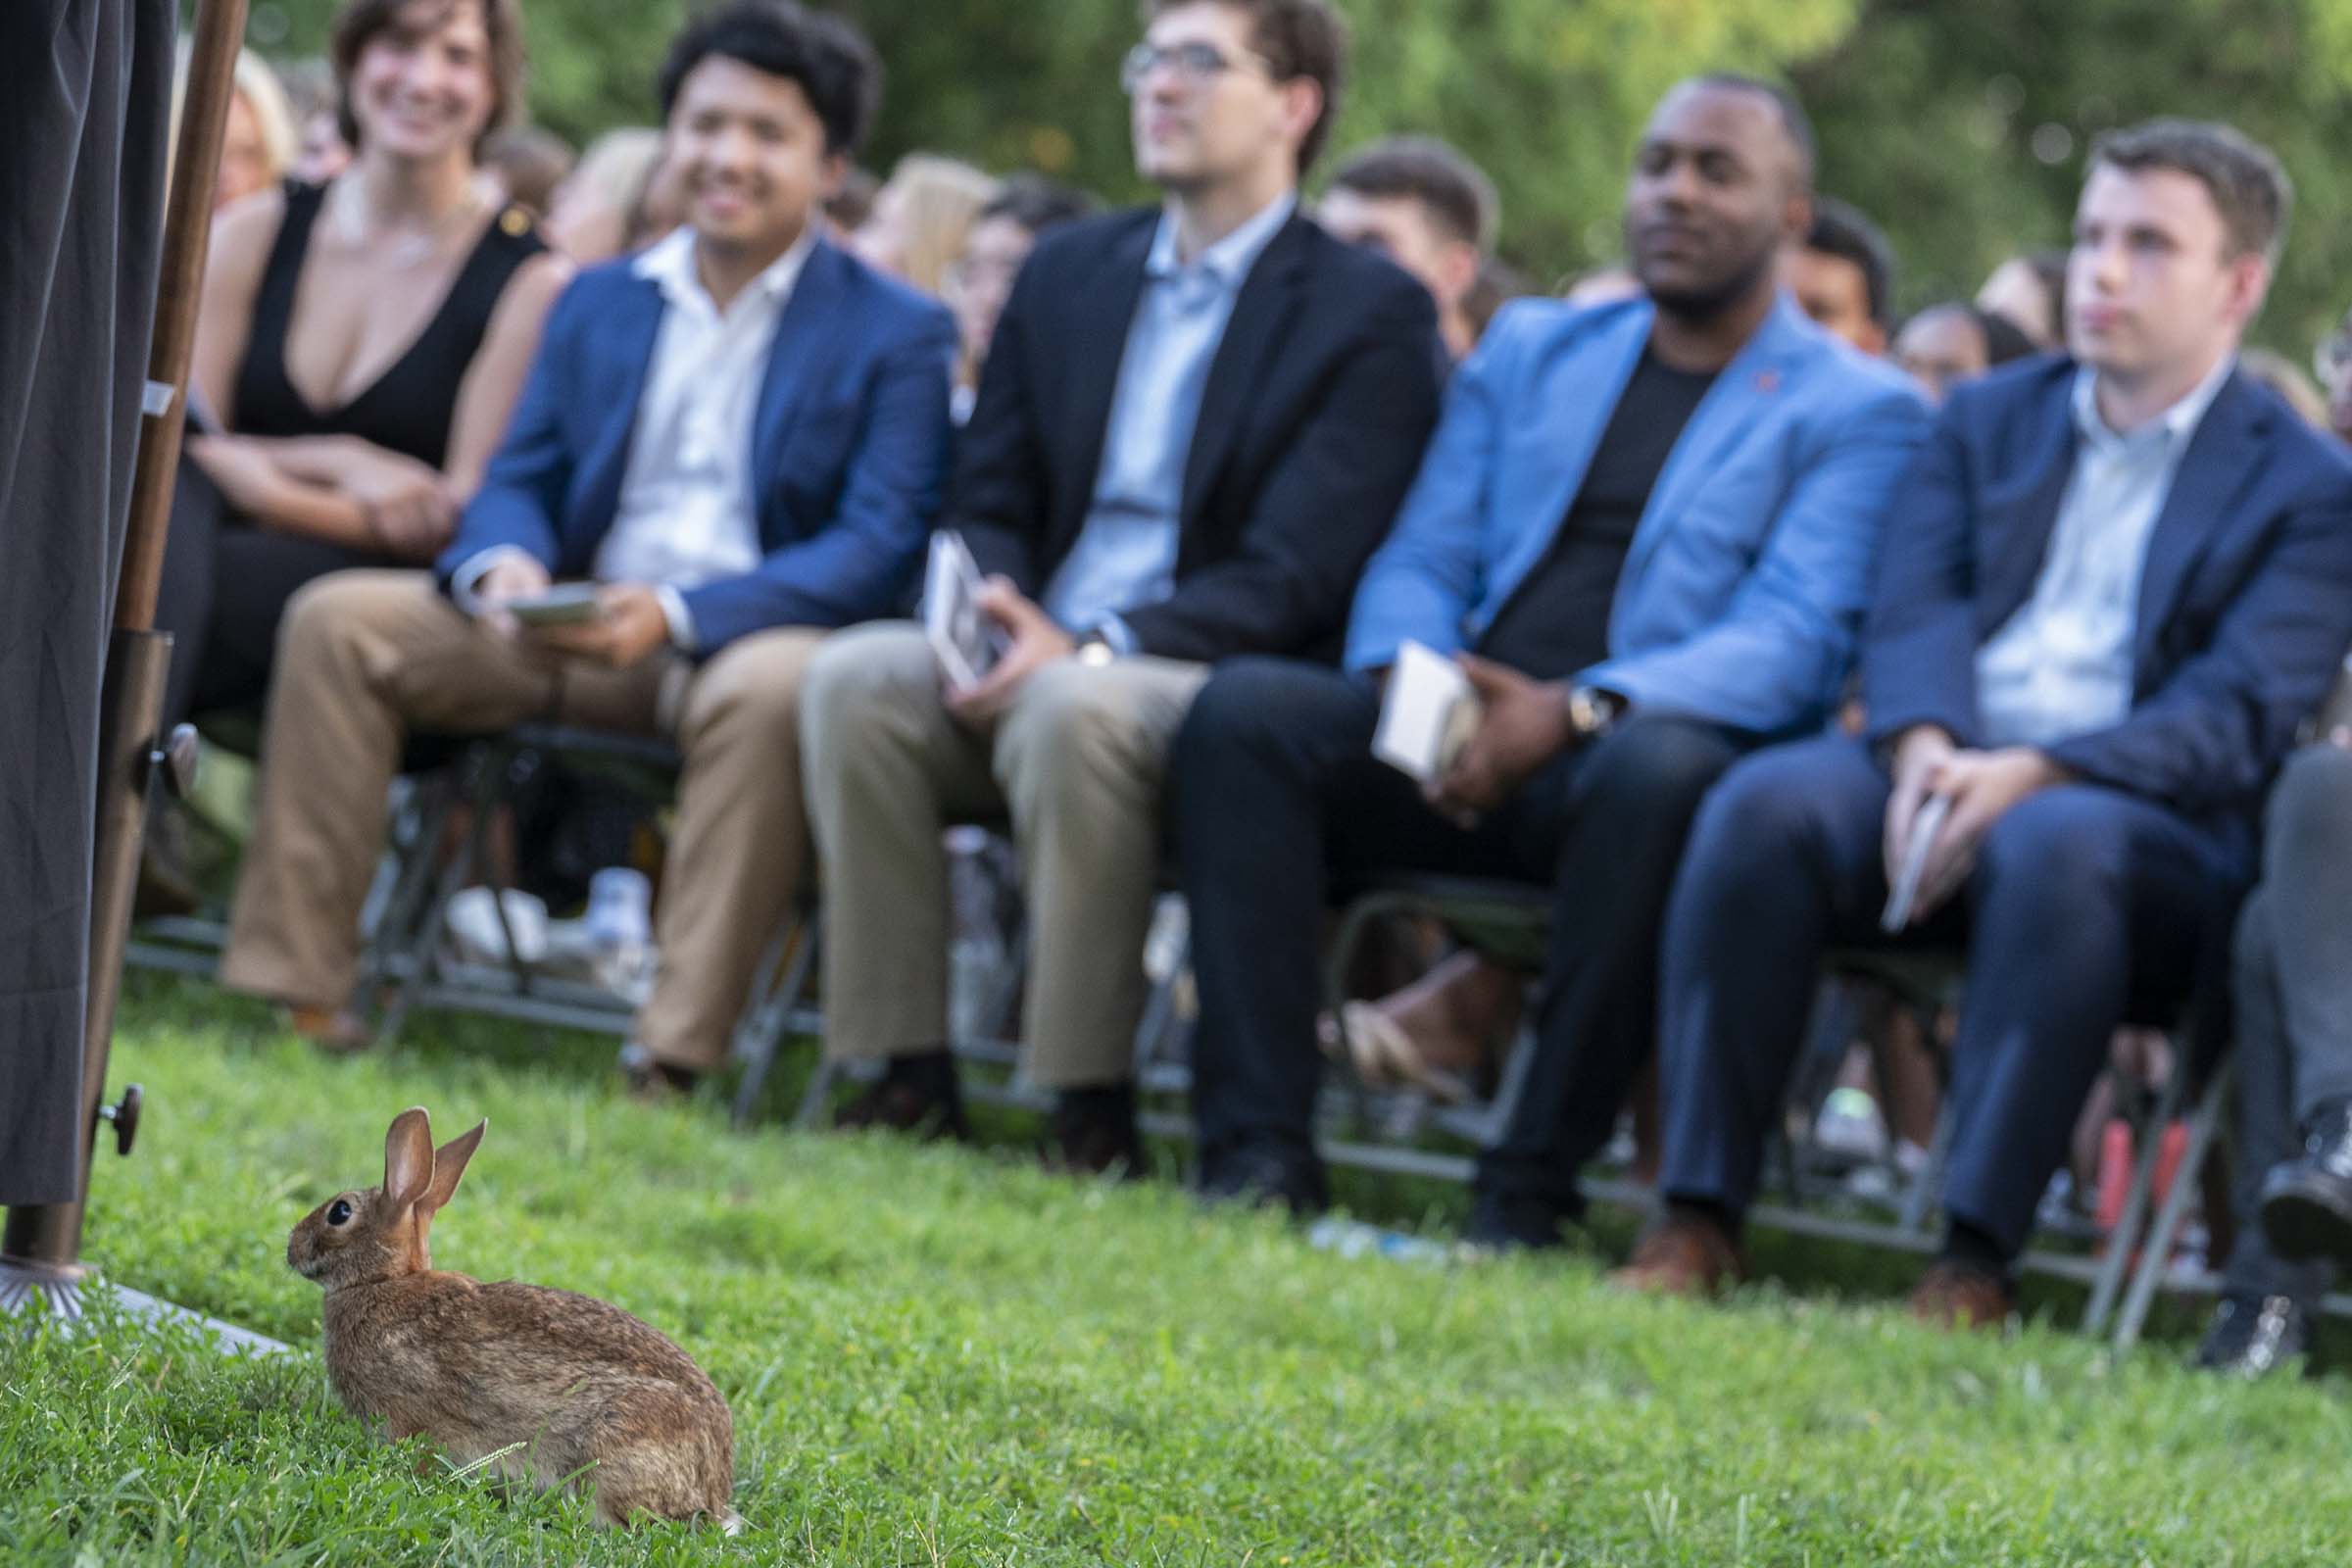 Bunny attending convocation